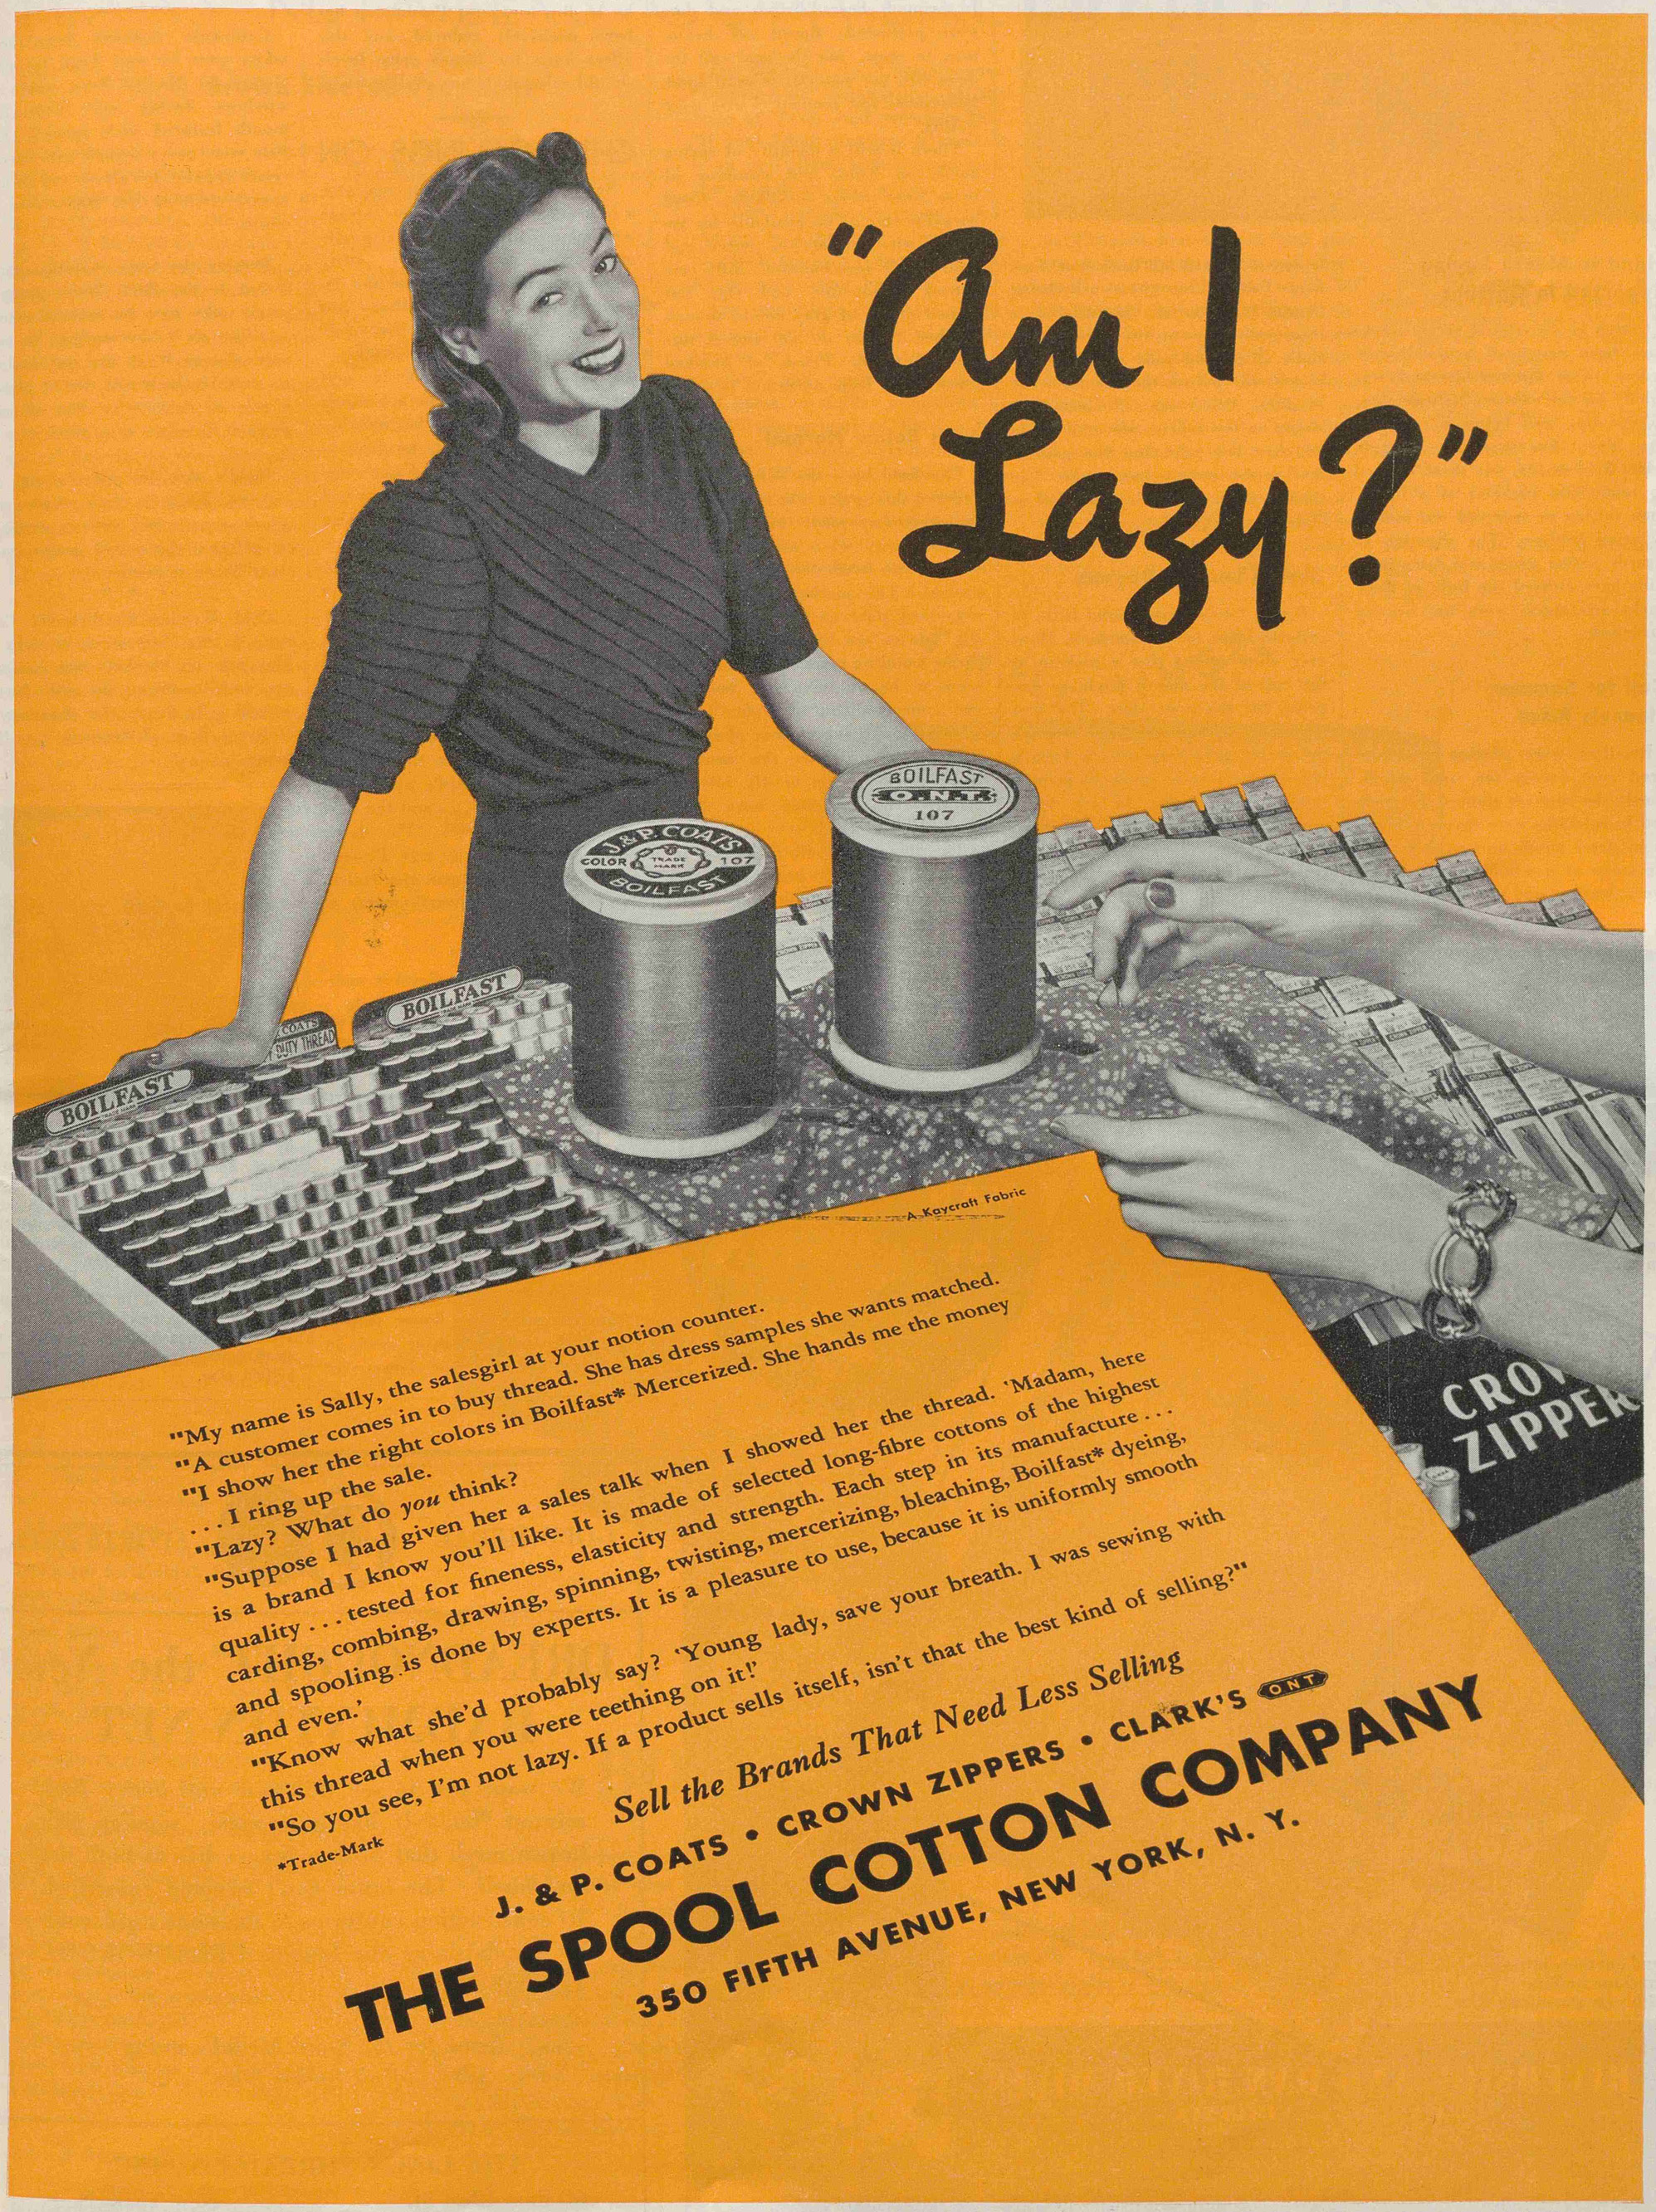 Ad for sewing notions; image shows a woman at a product display, pair of hands reaching for products. Prominent text reads: "Am I Lazy?"